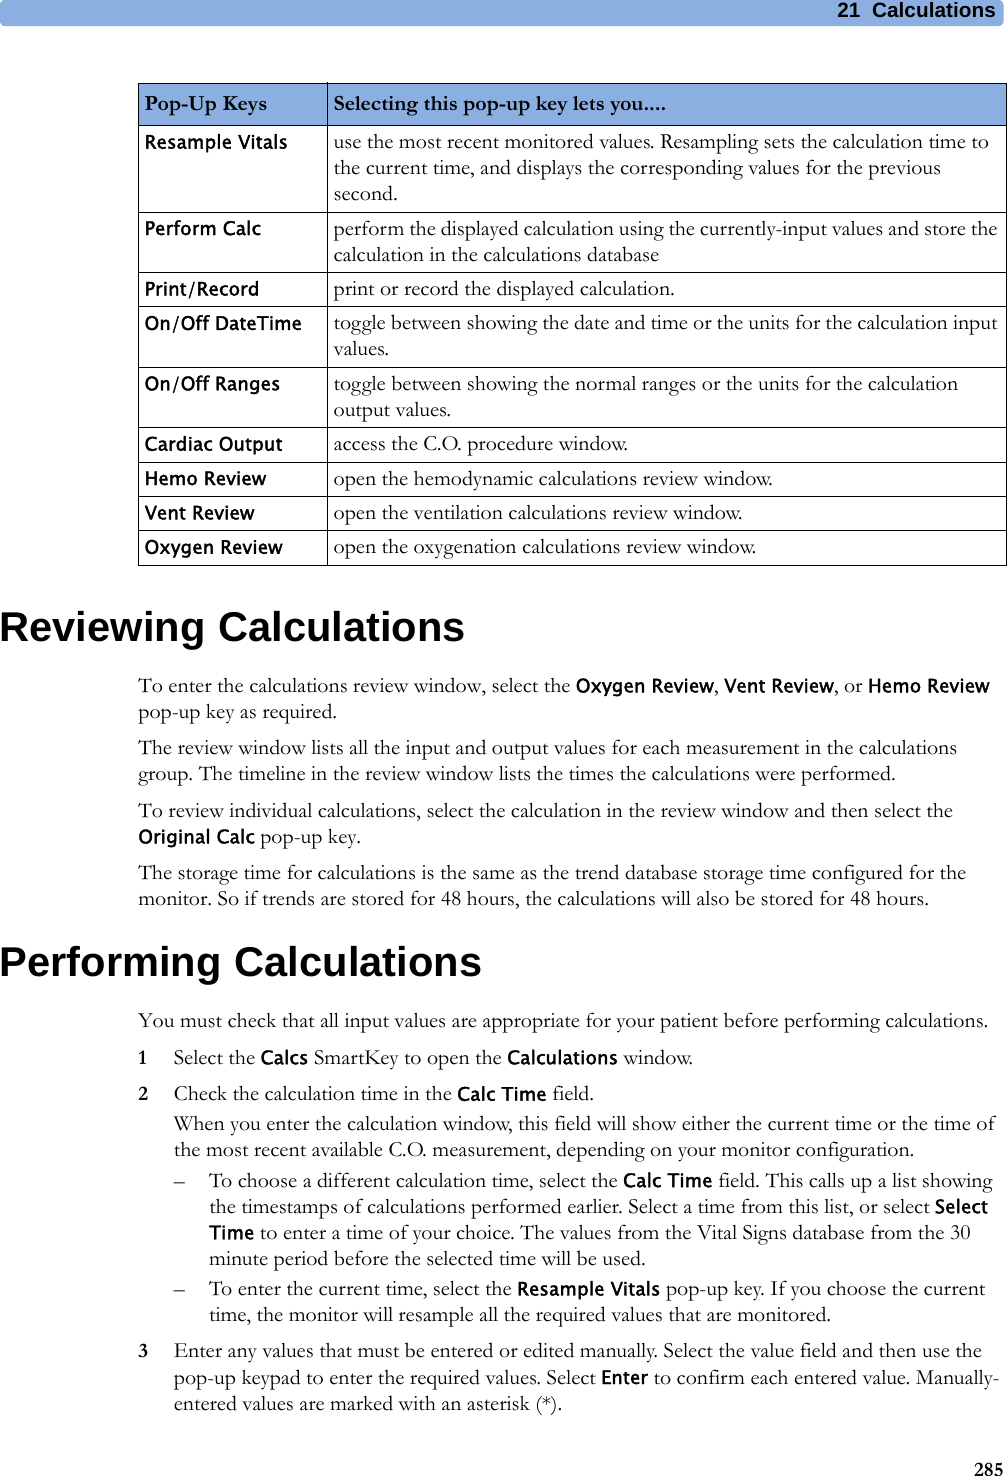 21 Calculations285Reviewing CalculationsTo enter the calculations review window, select the Oxygen Review, Vent Review, or Hemo Review pop-up key as required.The review window lists all the input and output values for each measurement in the calculations group. The timeline in the review window lists the times the calculations were performed.To review individual calculations, select the calculation in the review window and then select the Original Calc pop-up key.The storage time for calculations is the same as the trend database storage time configured for the monitor. So if trends are stored for 48 hours, the calculations will also be stored for 48 hours.Performing CalculationsYou must check that all input values are appropriate for your patient before performing calculations.1Select the Calcs SmartKey to open the Calculations window.2Check the calculation time in the Calc Time field.When you enter the calculation window, this field will show either the current time or the time of the most recent available C.O. measurement, depending on your monitor configuration.– To choose a different calculation time, select the Calc Time field. This calls up a list showing the timestamps of calculations performed earlier. Select a time from this list, or select Select Time to enter a time of your choice. The values from the Vital Signs database from the 30 minute period before the selected time will be used. – To enter the current time, select the Resample Vitals pop-up key. If you choose the current time, the monitor will resample all the required values that are monitored.3Enter any values that must be entered or edited manually. Select the value field and then use the pop-up keypad to enter the required values. Select Enter to confirm each entered value. Manually-entered values are marked with an asterisk (*).Pop-Up Keys Selecting this pop-up key lets you....Resample Vitals use the most recent monitored values. Resampling sets the calculation time to the current time, and displays the corresponding values for the previous second.Perform Calc perform the displayed calculation using the currently-input values and store the calculation in the calculations databasePrint/Record print or record the displayed calculation.On/Off DateTime toggle between showing the date and time or the units for the calculation input values.On/Off Ranges toggle between showing the normal ranges or the units for the calculation output values.Cardiac Output access the C.O. procedure window.Hemo Review open the hemodynamic calculations review window.Vent Review open the ventilation calculations review window.Oxygen Review open the oxygenation calculations review window.